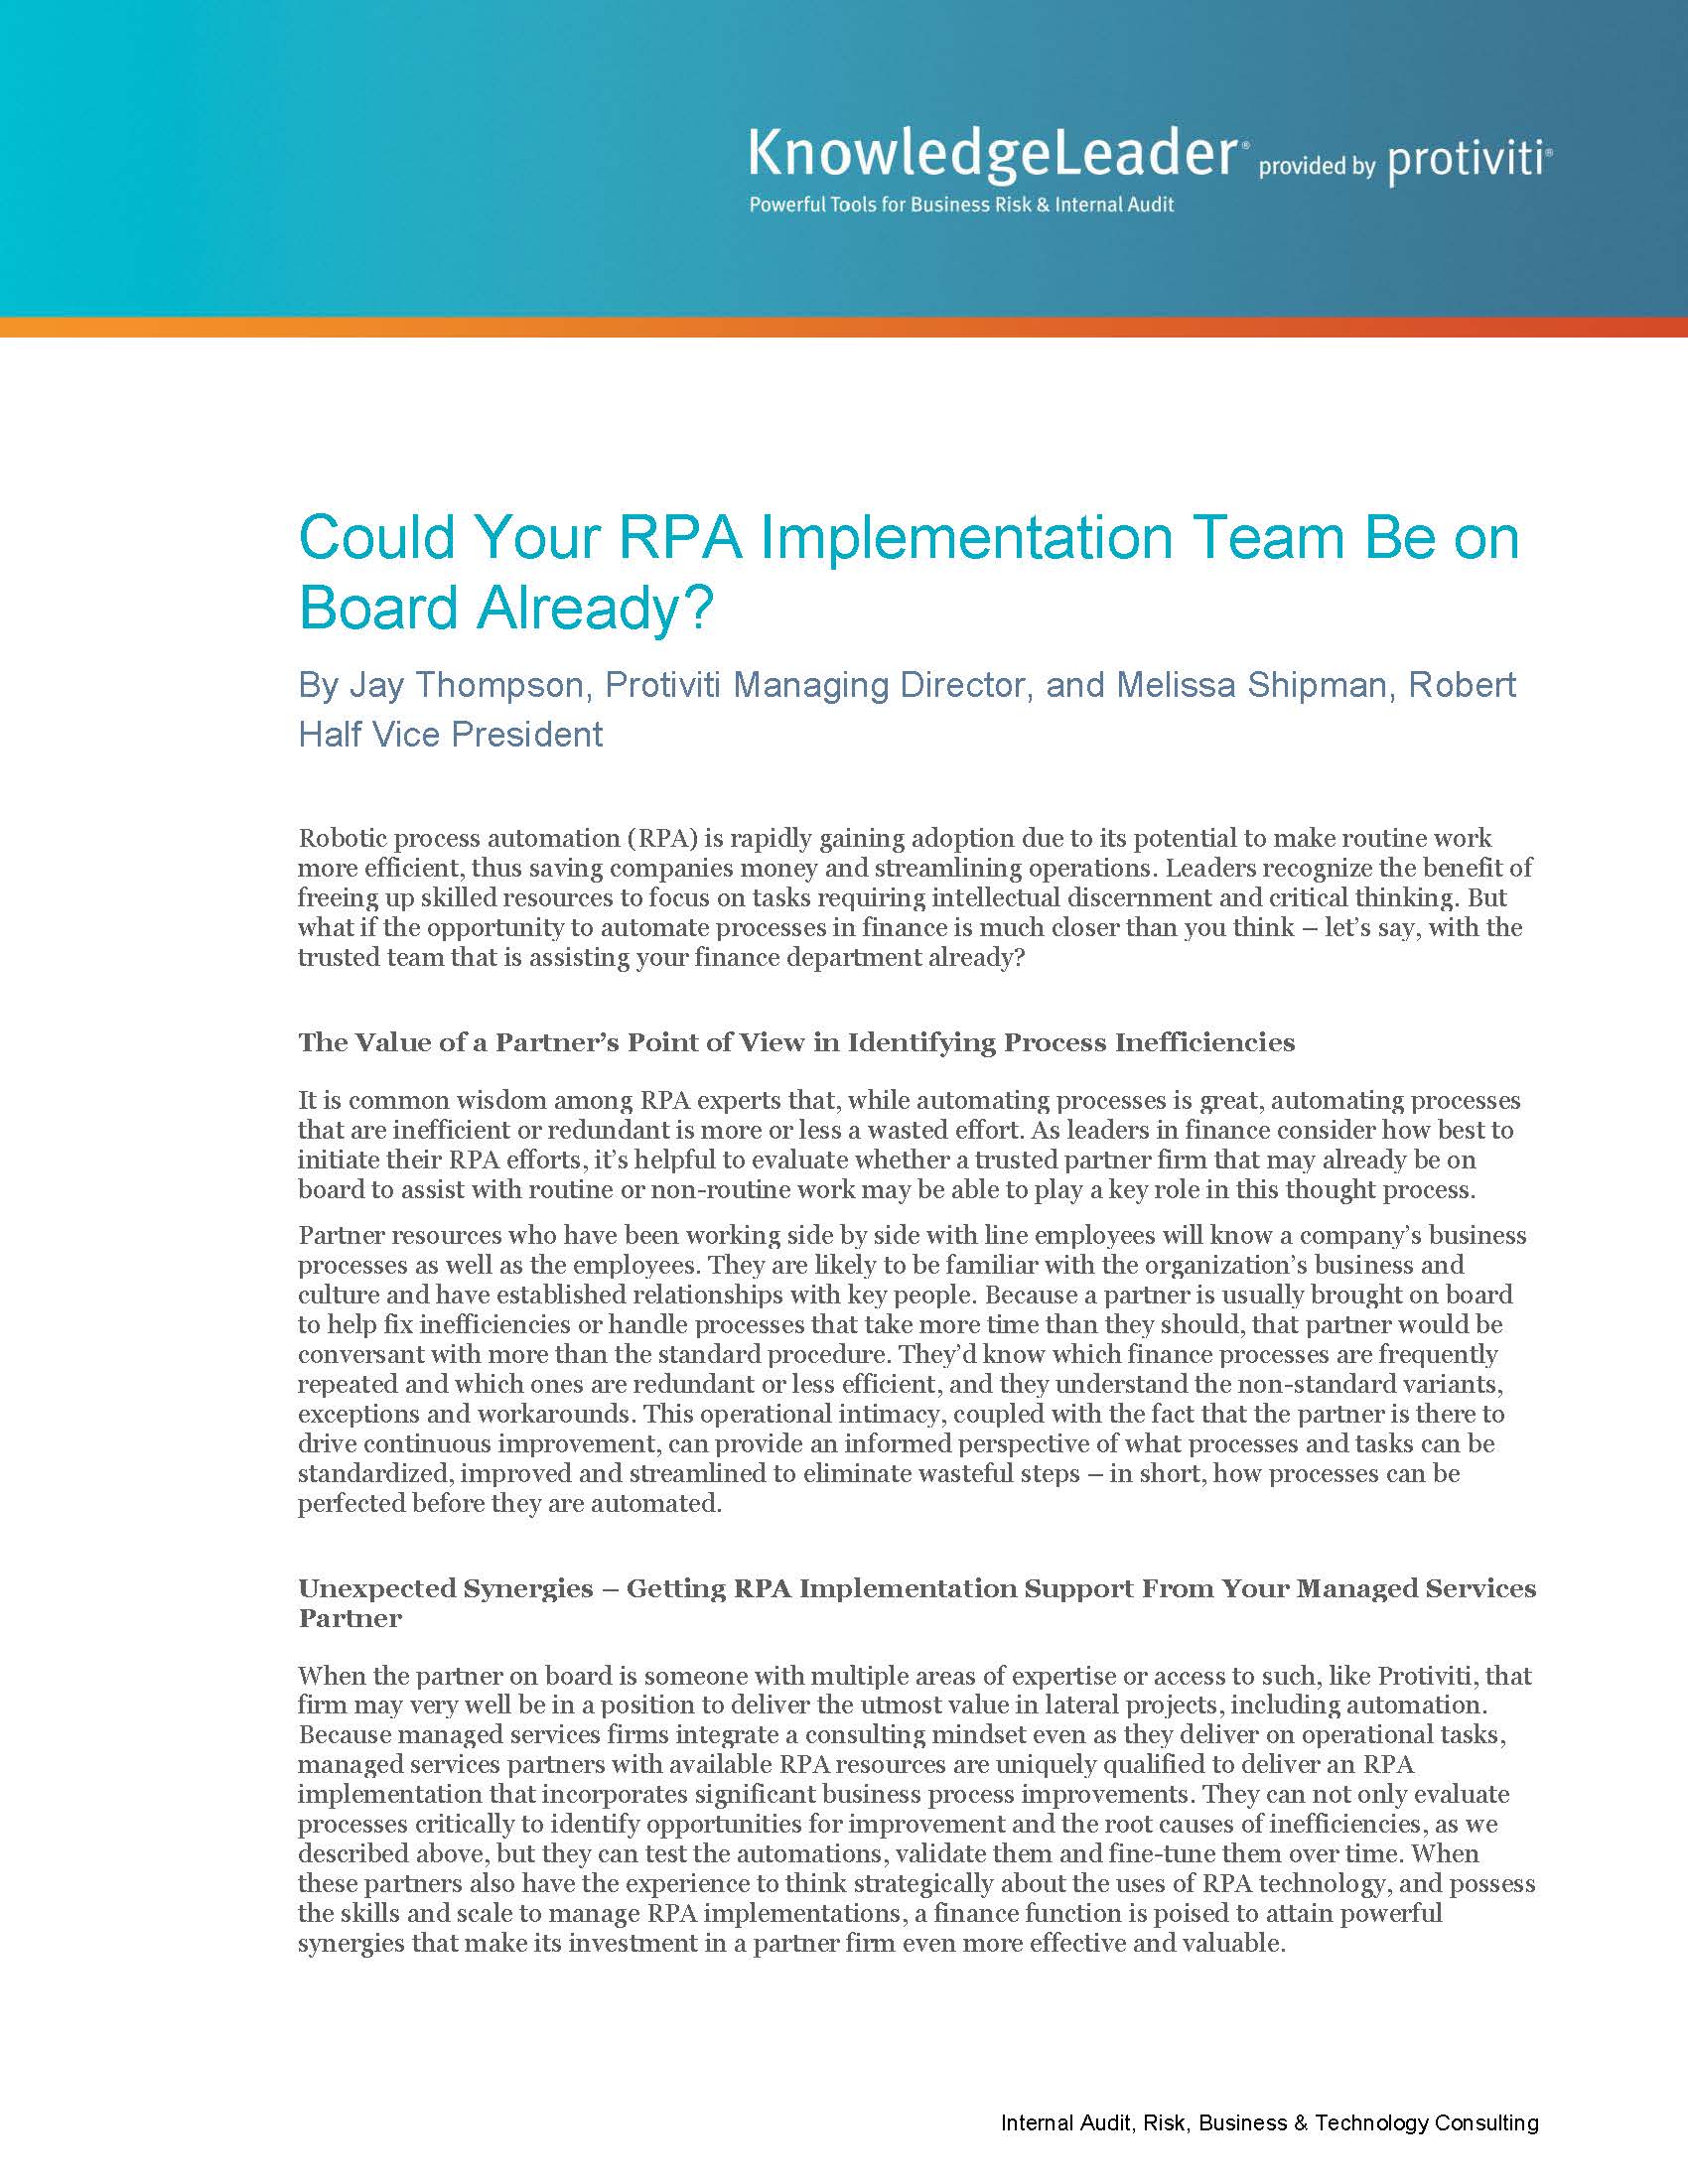 Screenshot of the first page of Could Your RPA Implementation Team Be on Board Already?